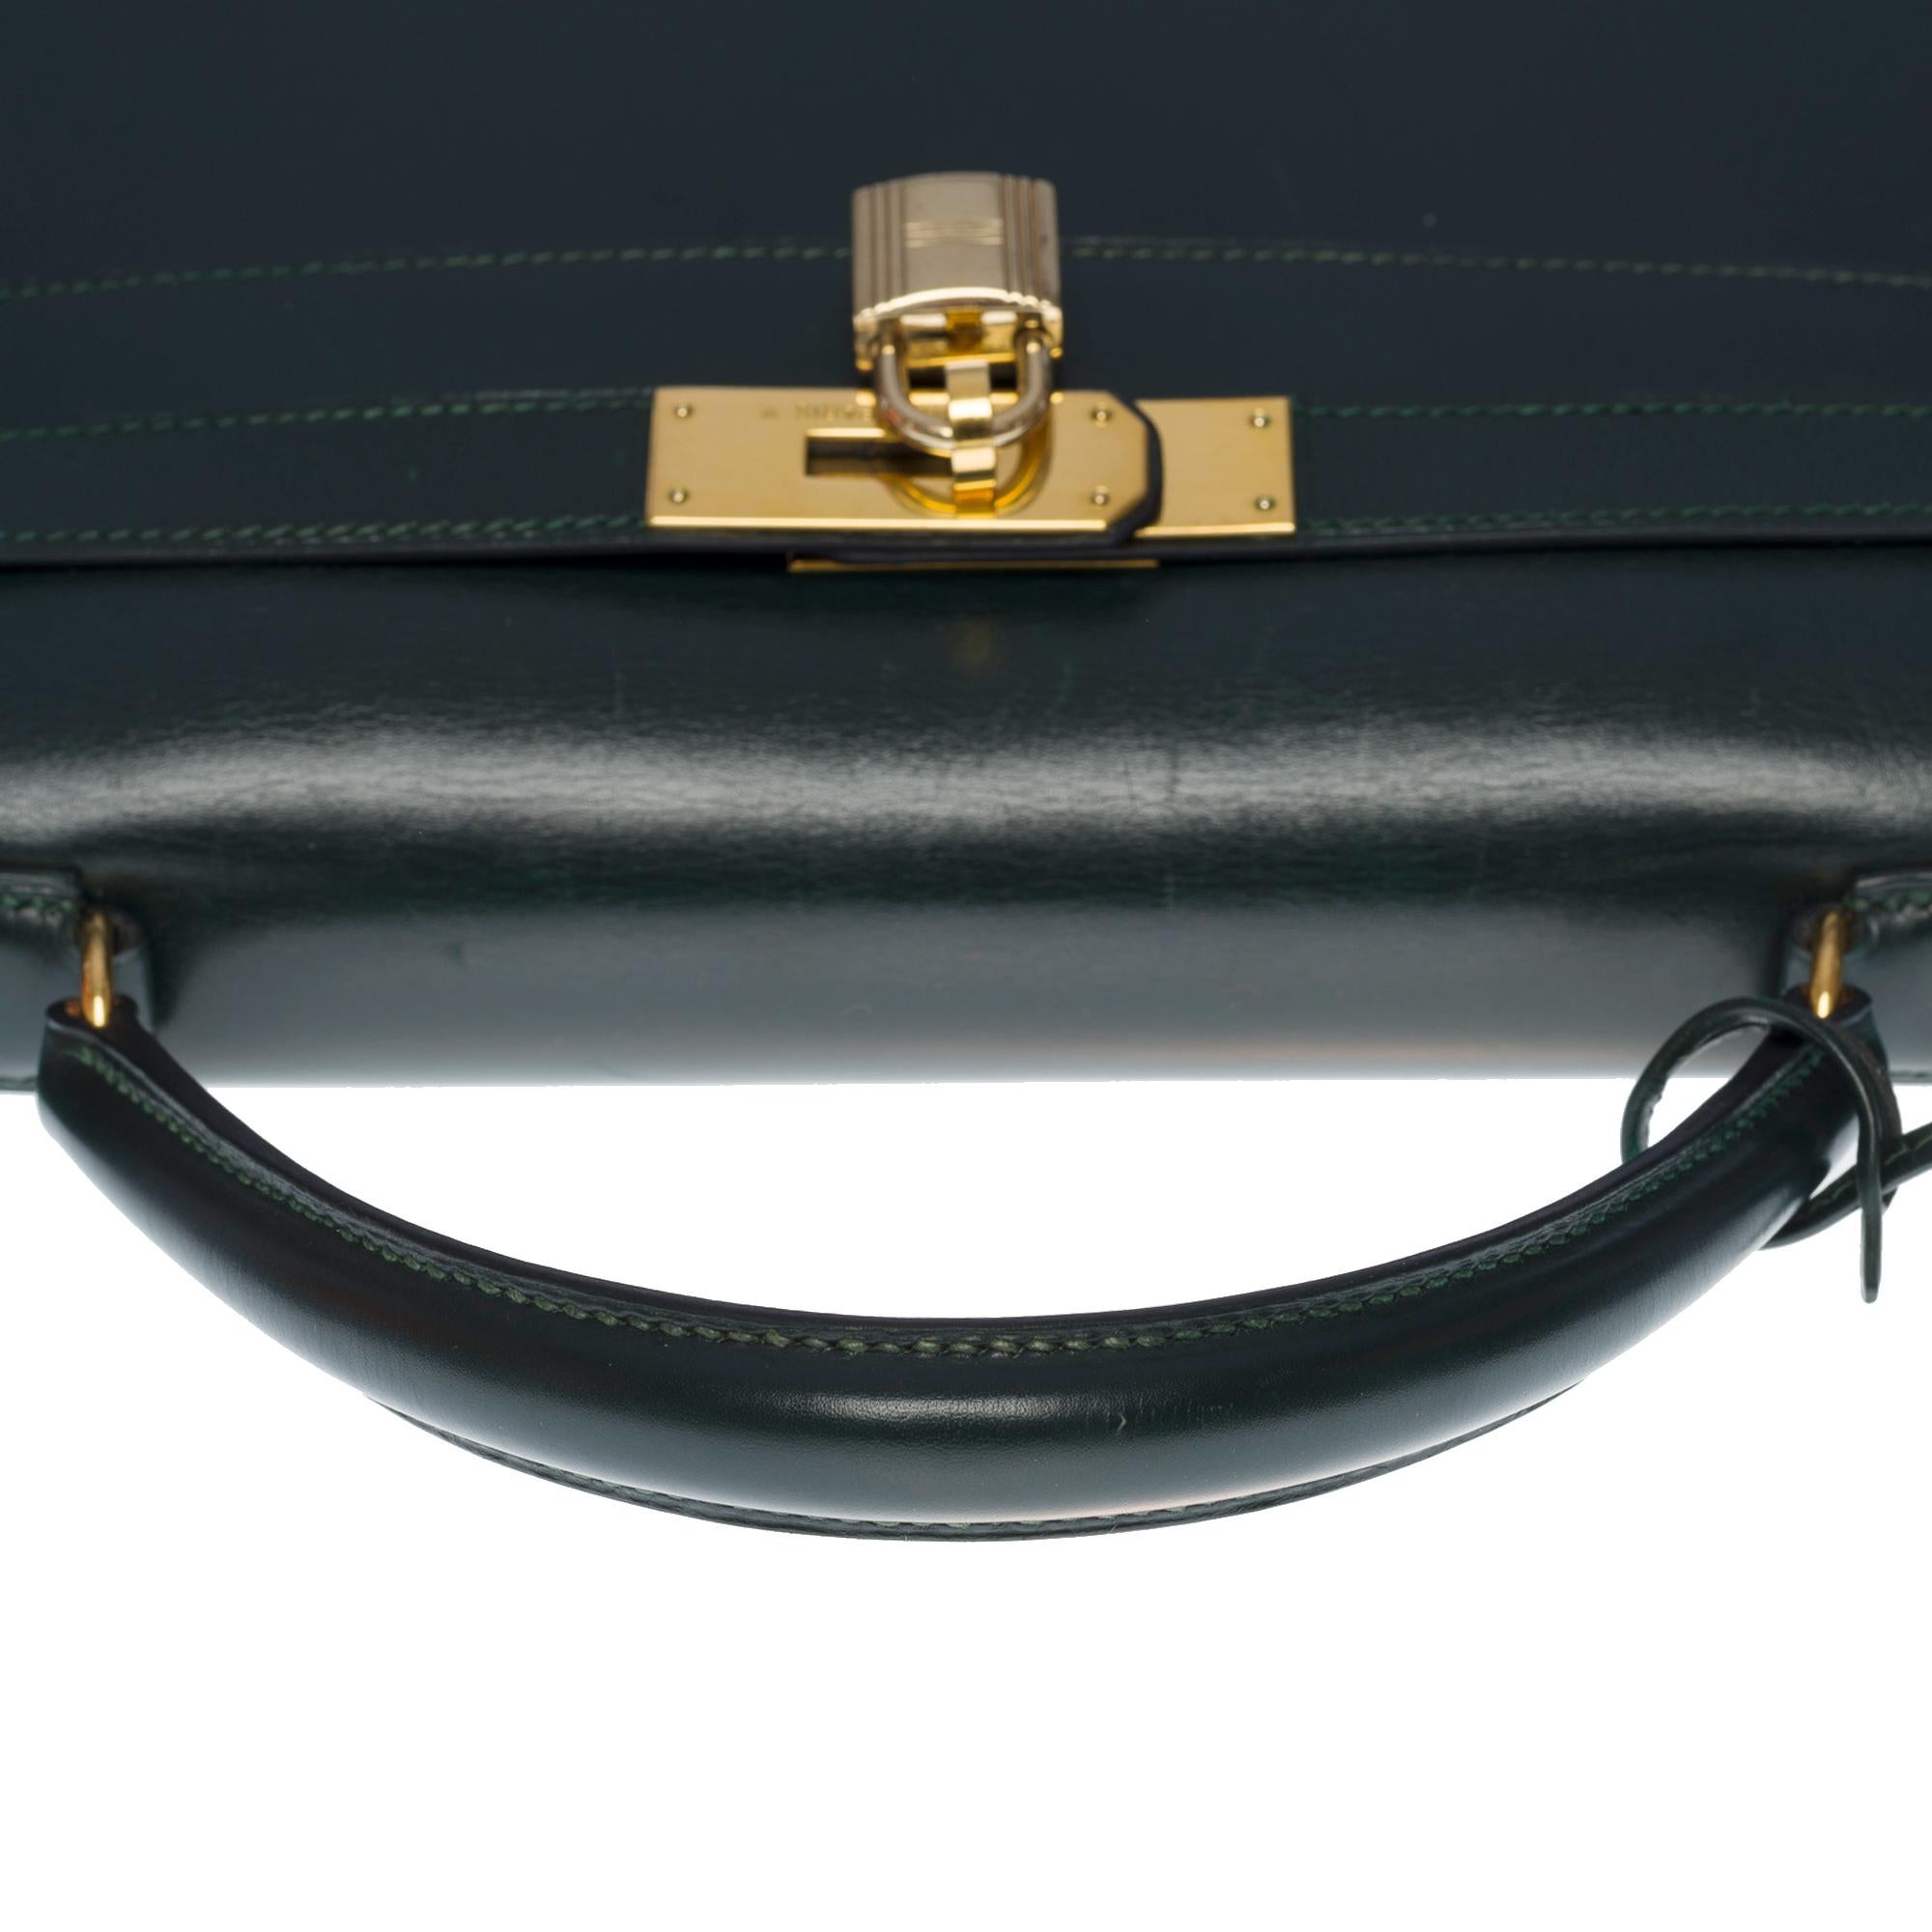 Rare Hermès Kelly 32 sellier handbag double straps in green box calf leather, GHW For Sale 3